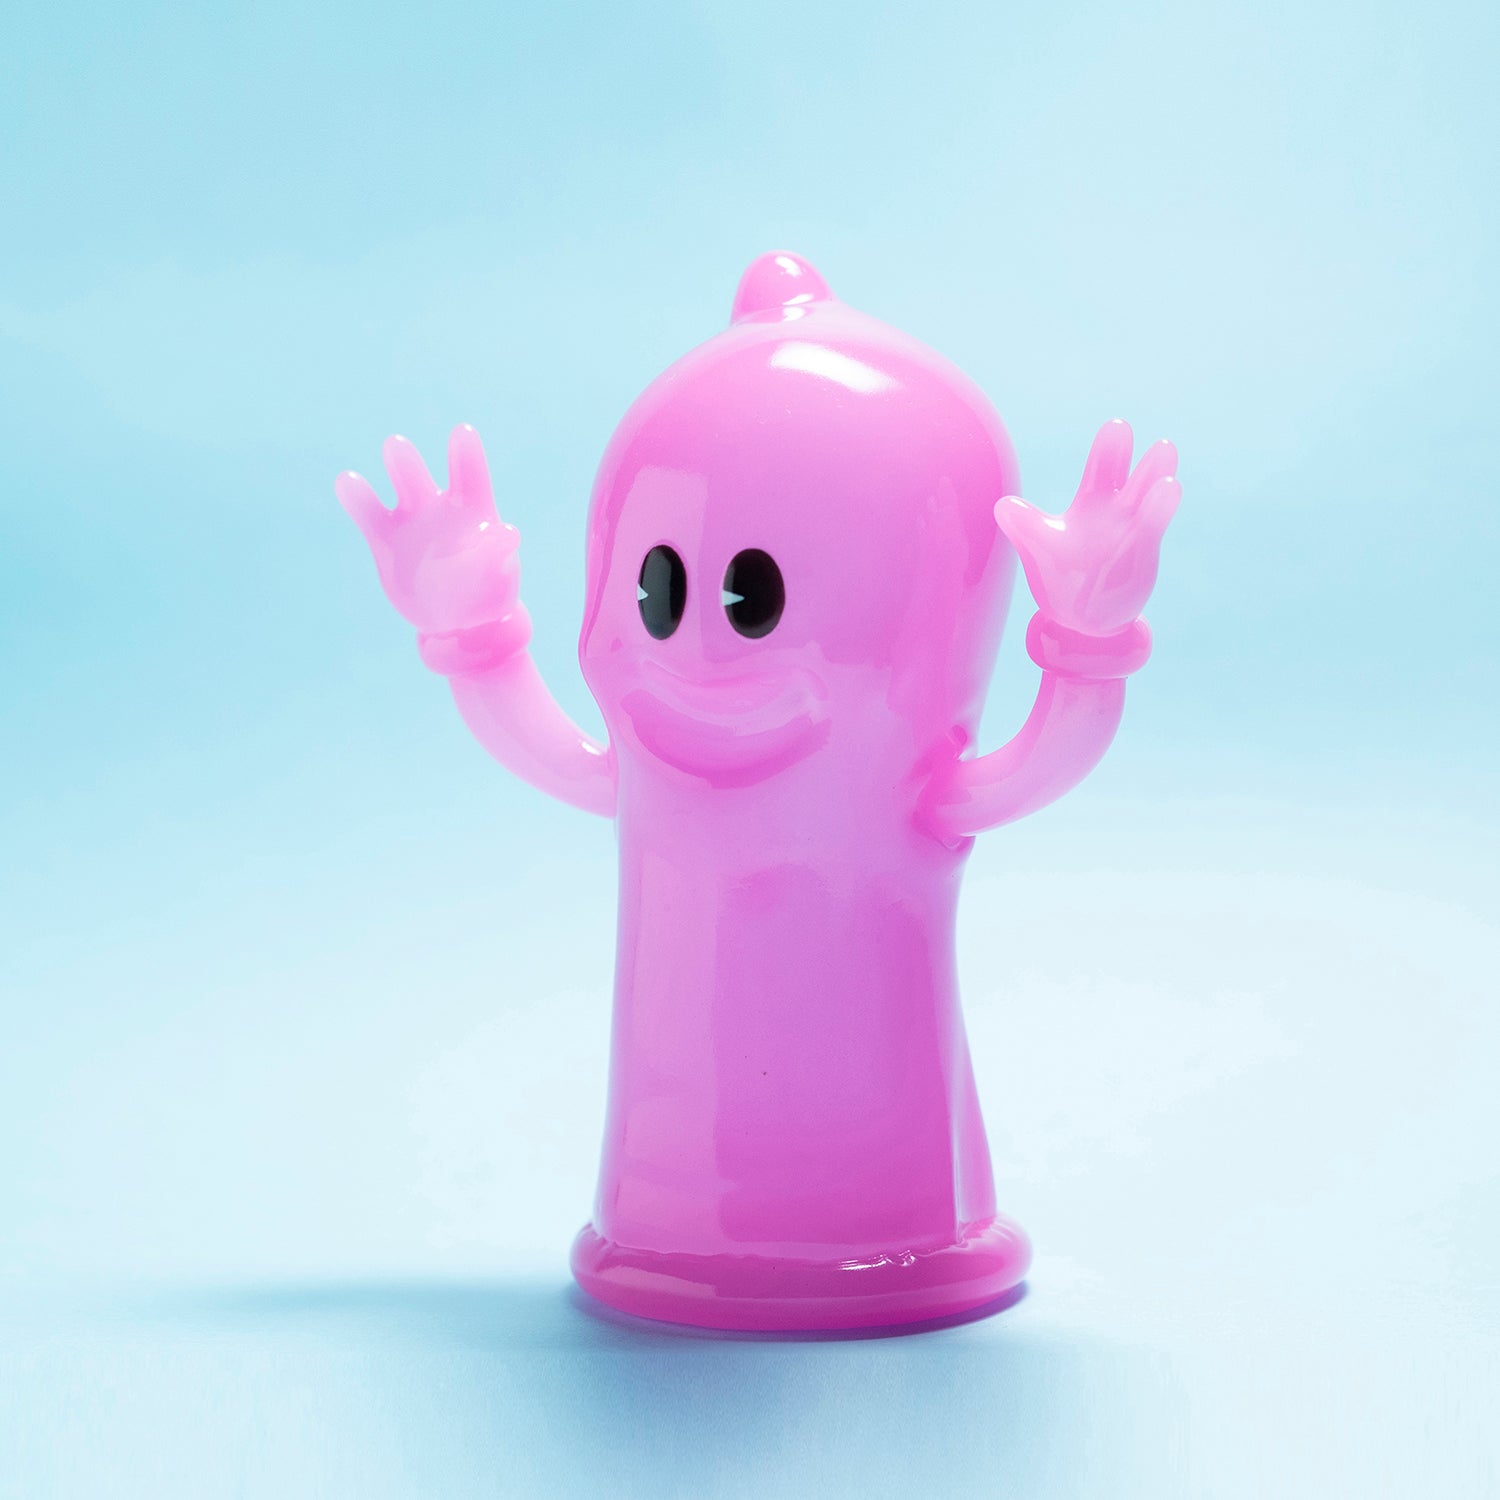 Rubber Boi GiD Pink edition 2.0 by C daan Made